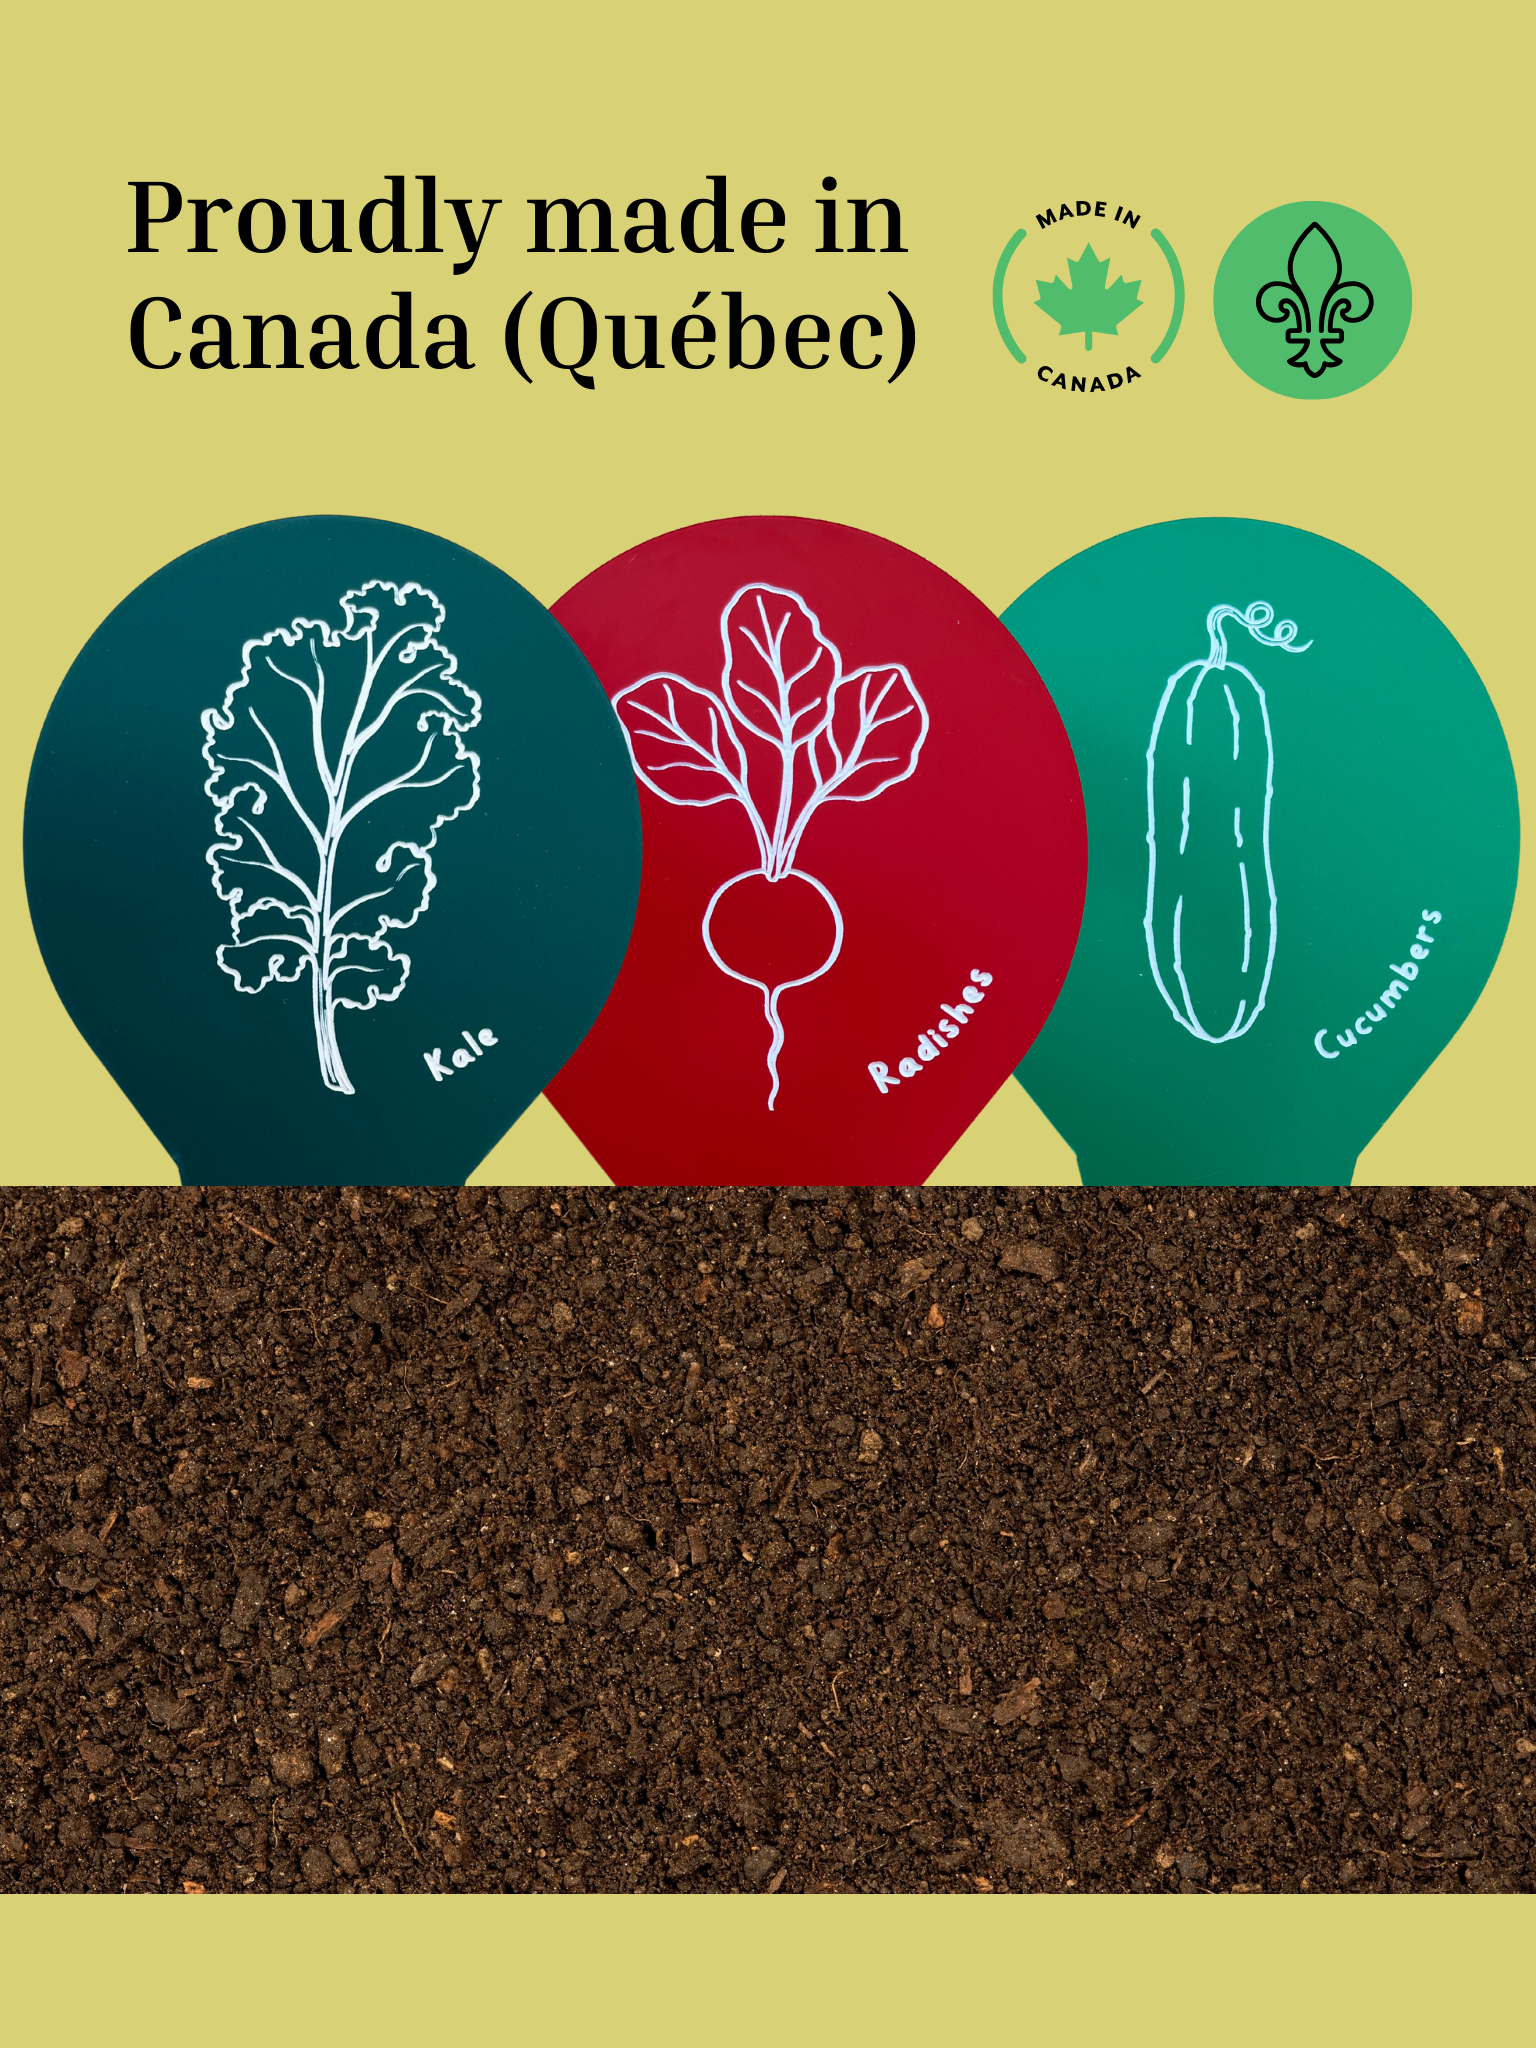 Garden Markers, Plant Labels, Fruits and Vegetables Illustration, made in Quebec, Canada